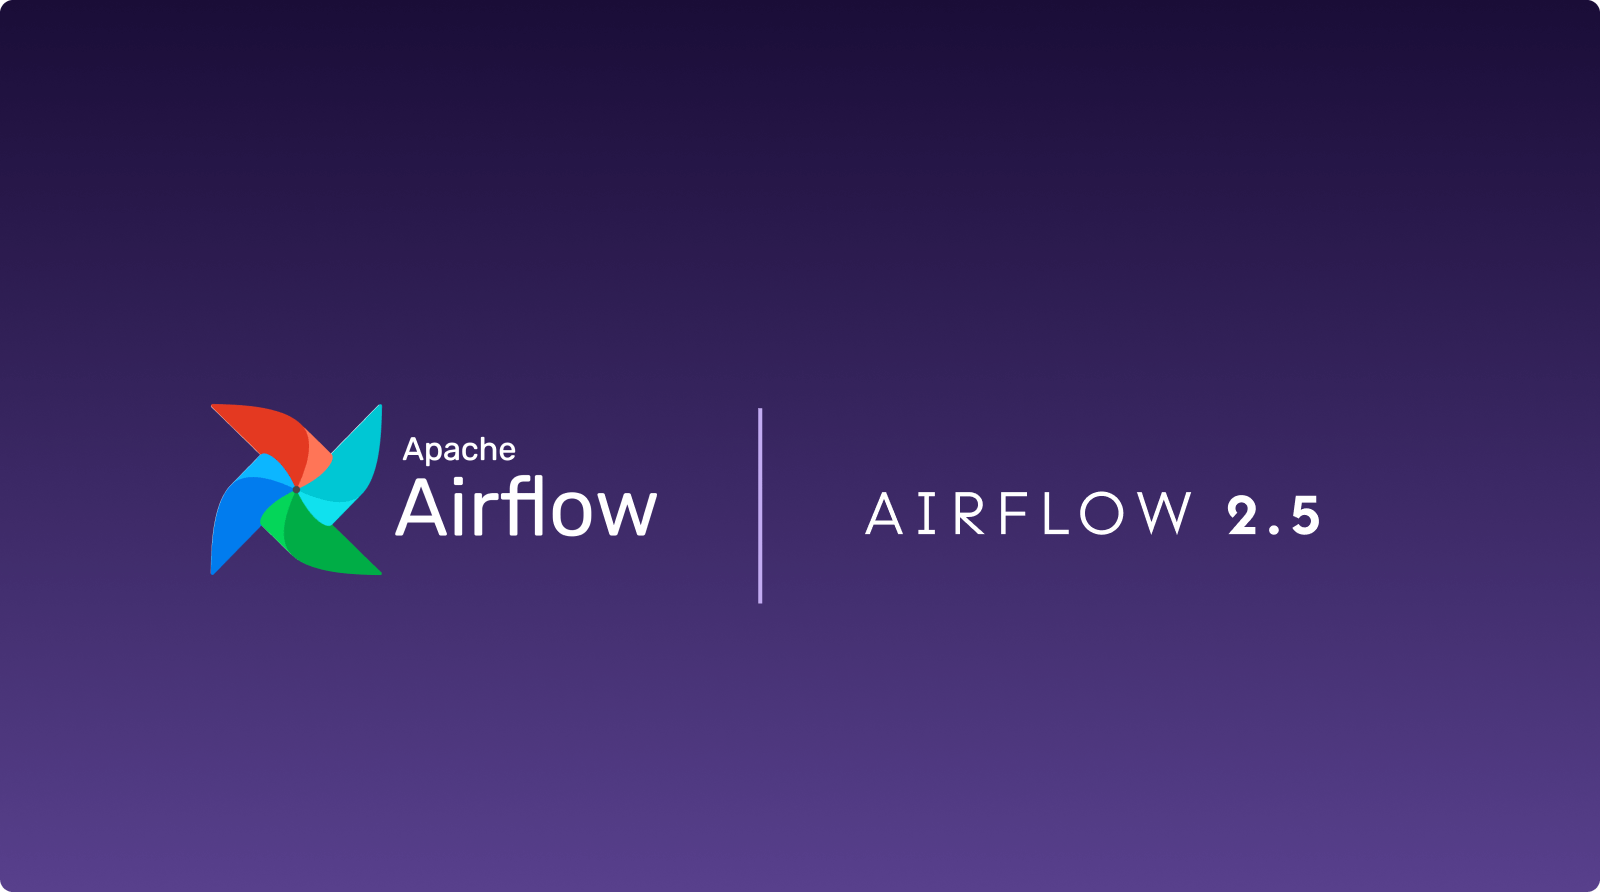 What’s New in Apache Airflow 2.5